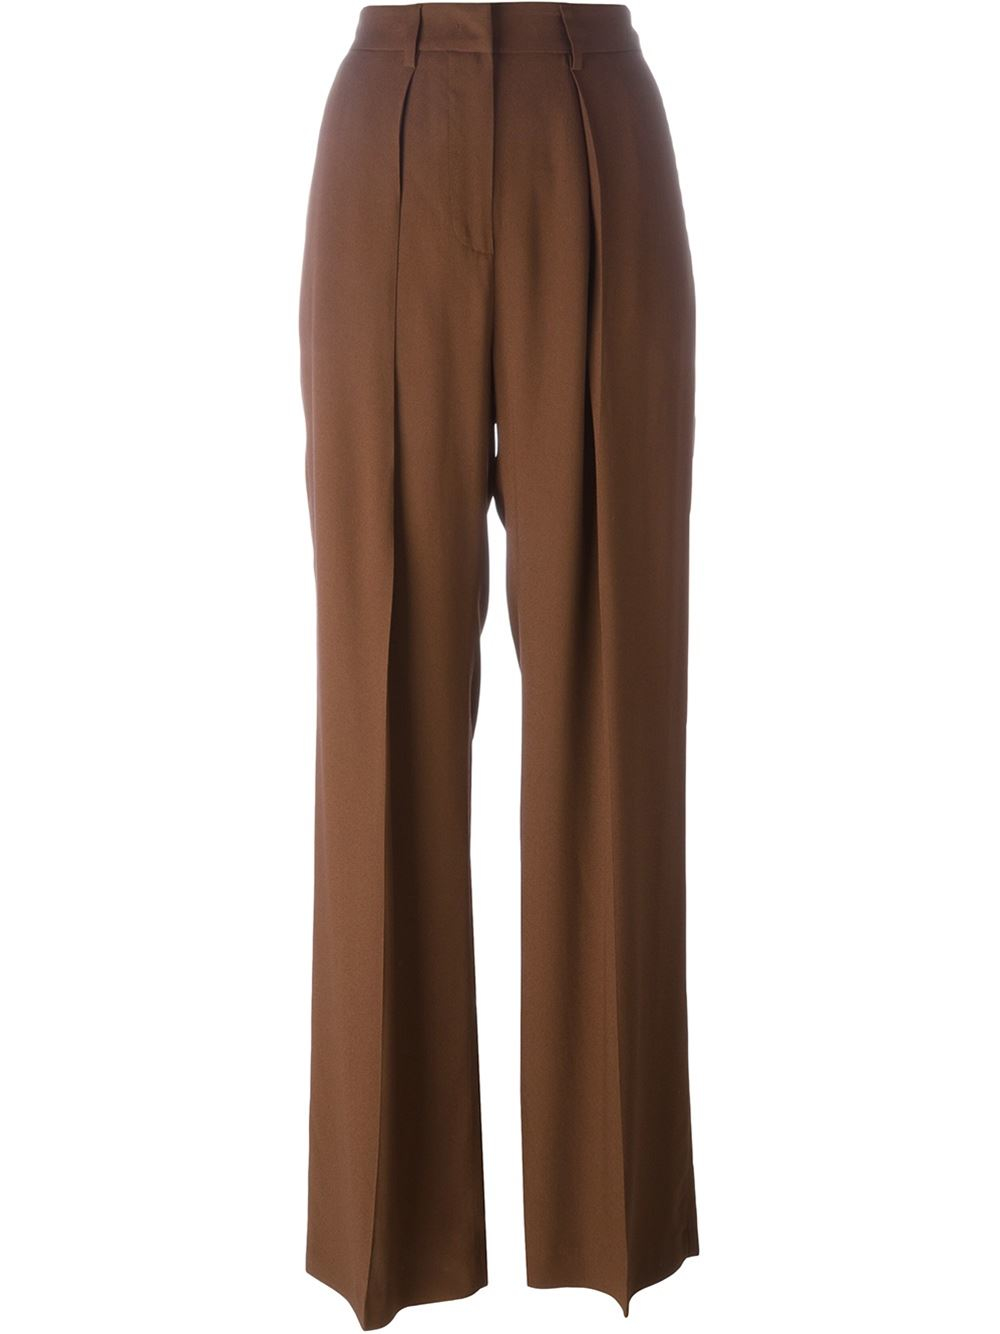 Msgm Wide Leg Pants in Brown | Lyst